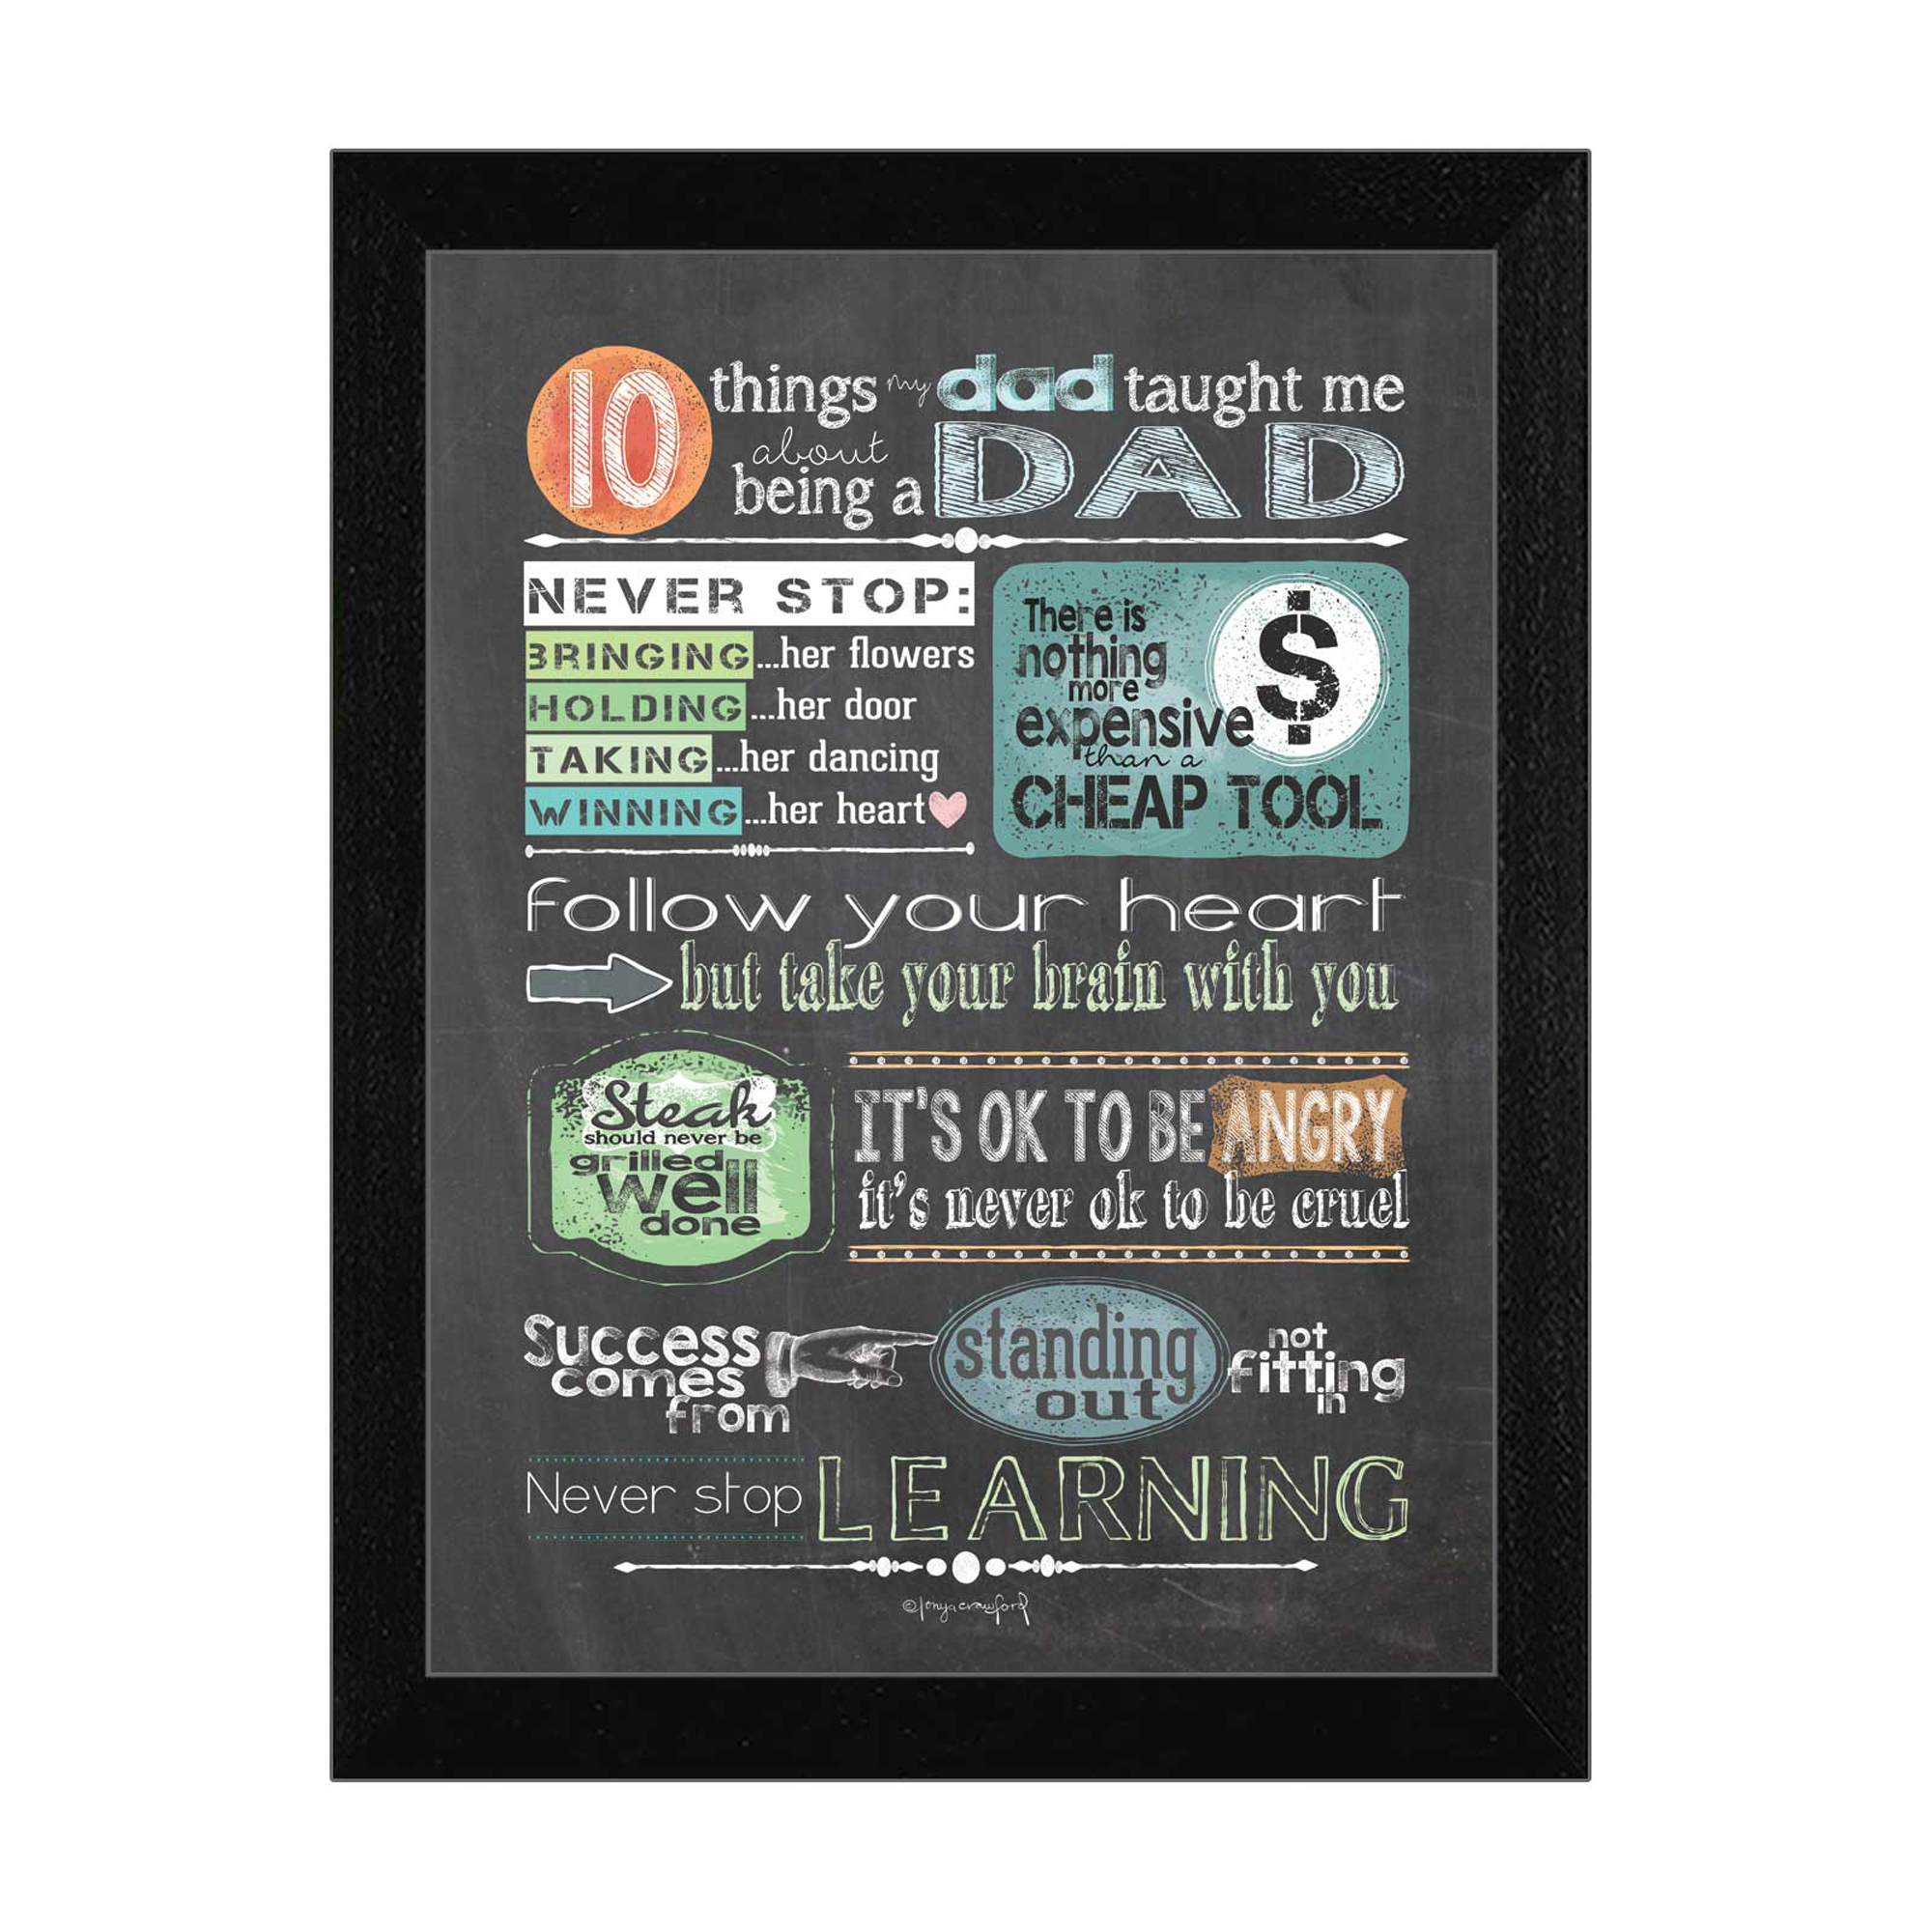 "Reminders from Dad" By Tonya Crawford, Printed Wall Art, Ready To Hang Framed Poster, Black Frame